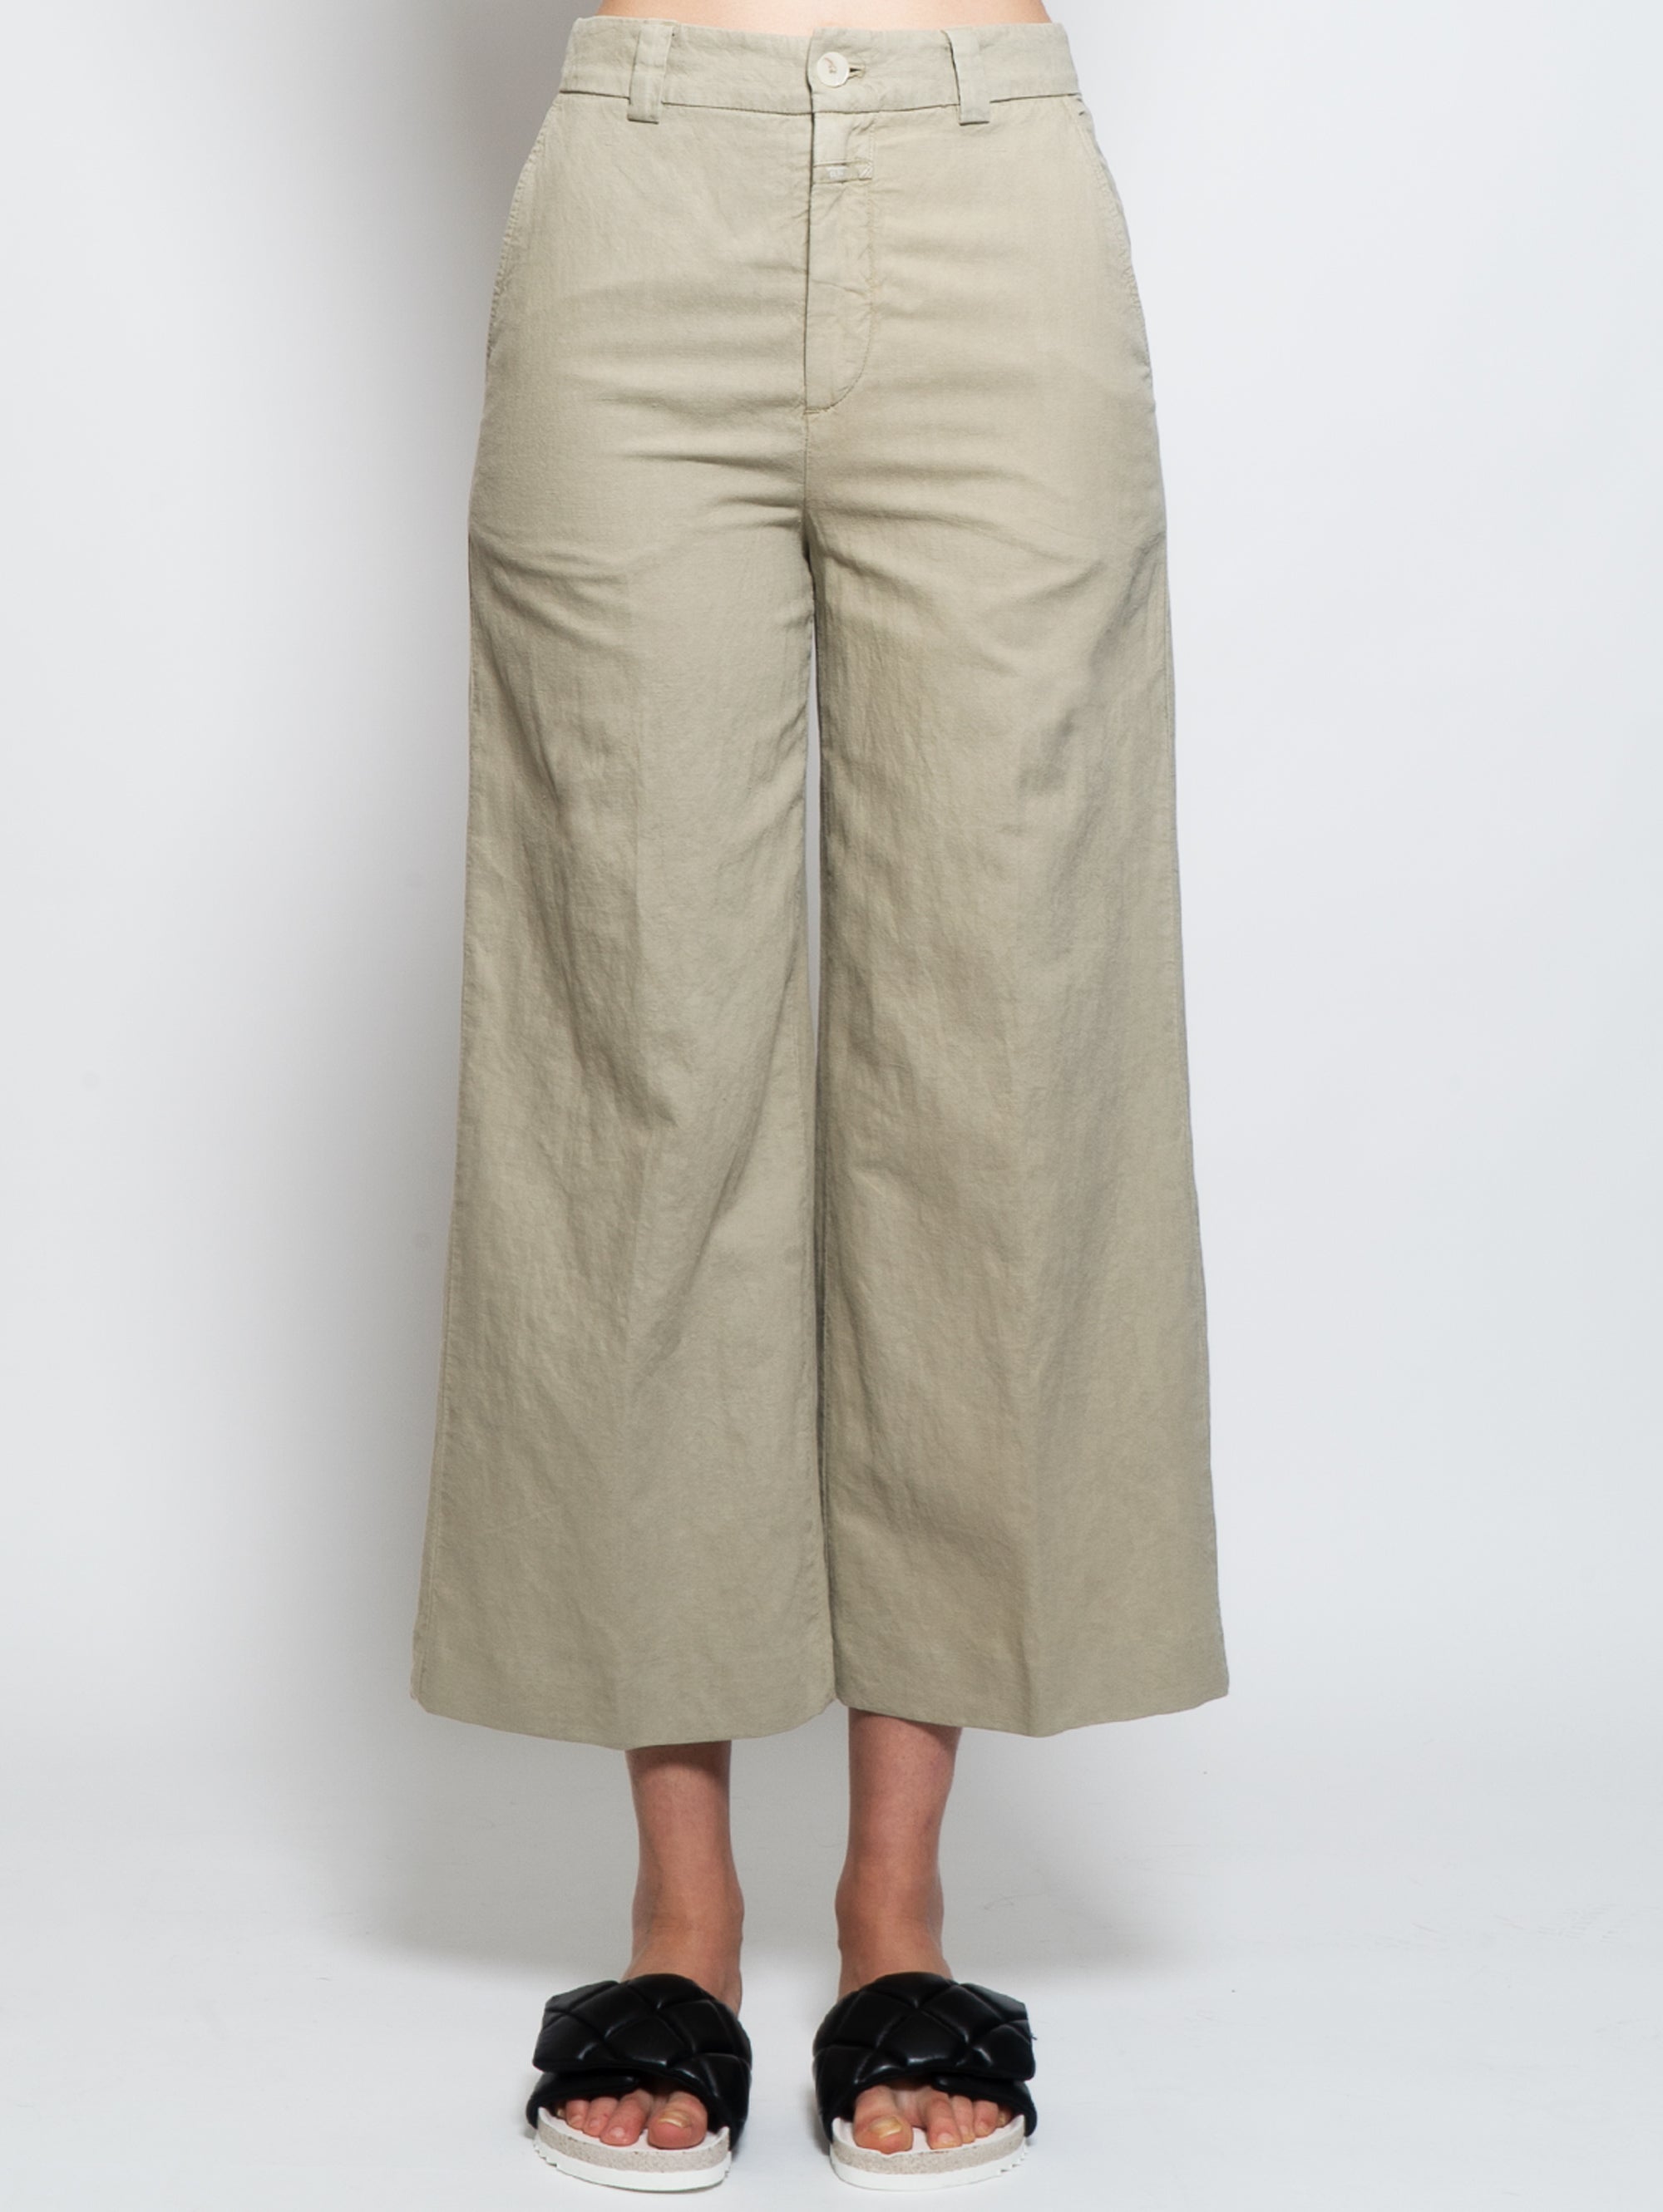 Green Linen and Cotton Pants